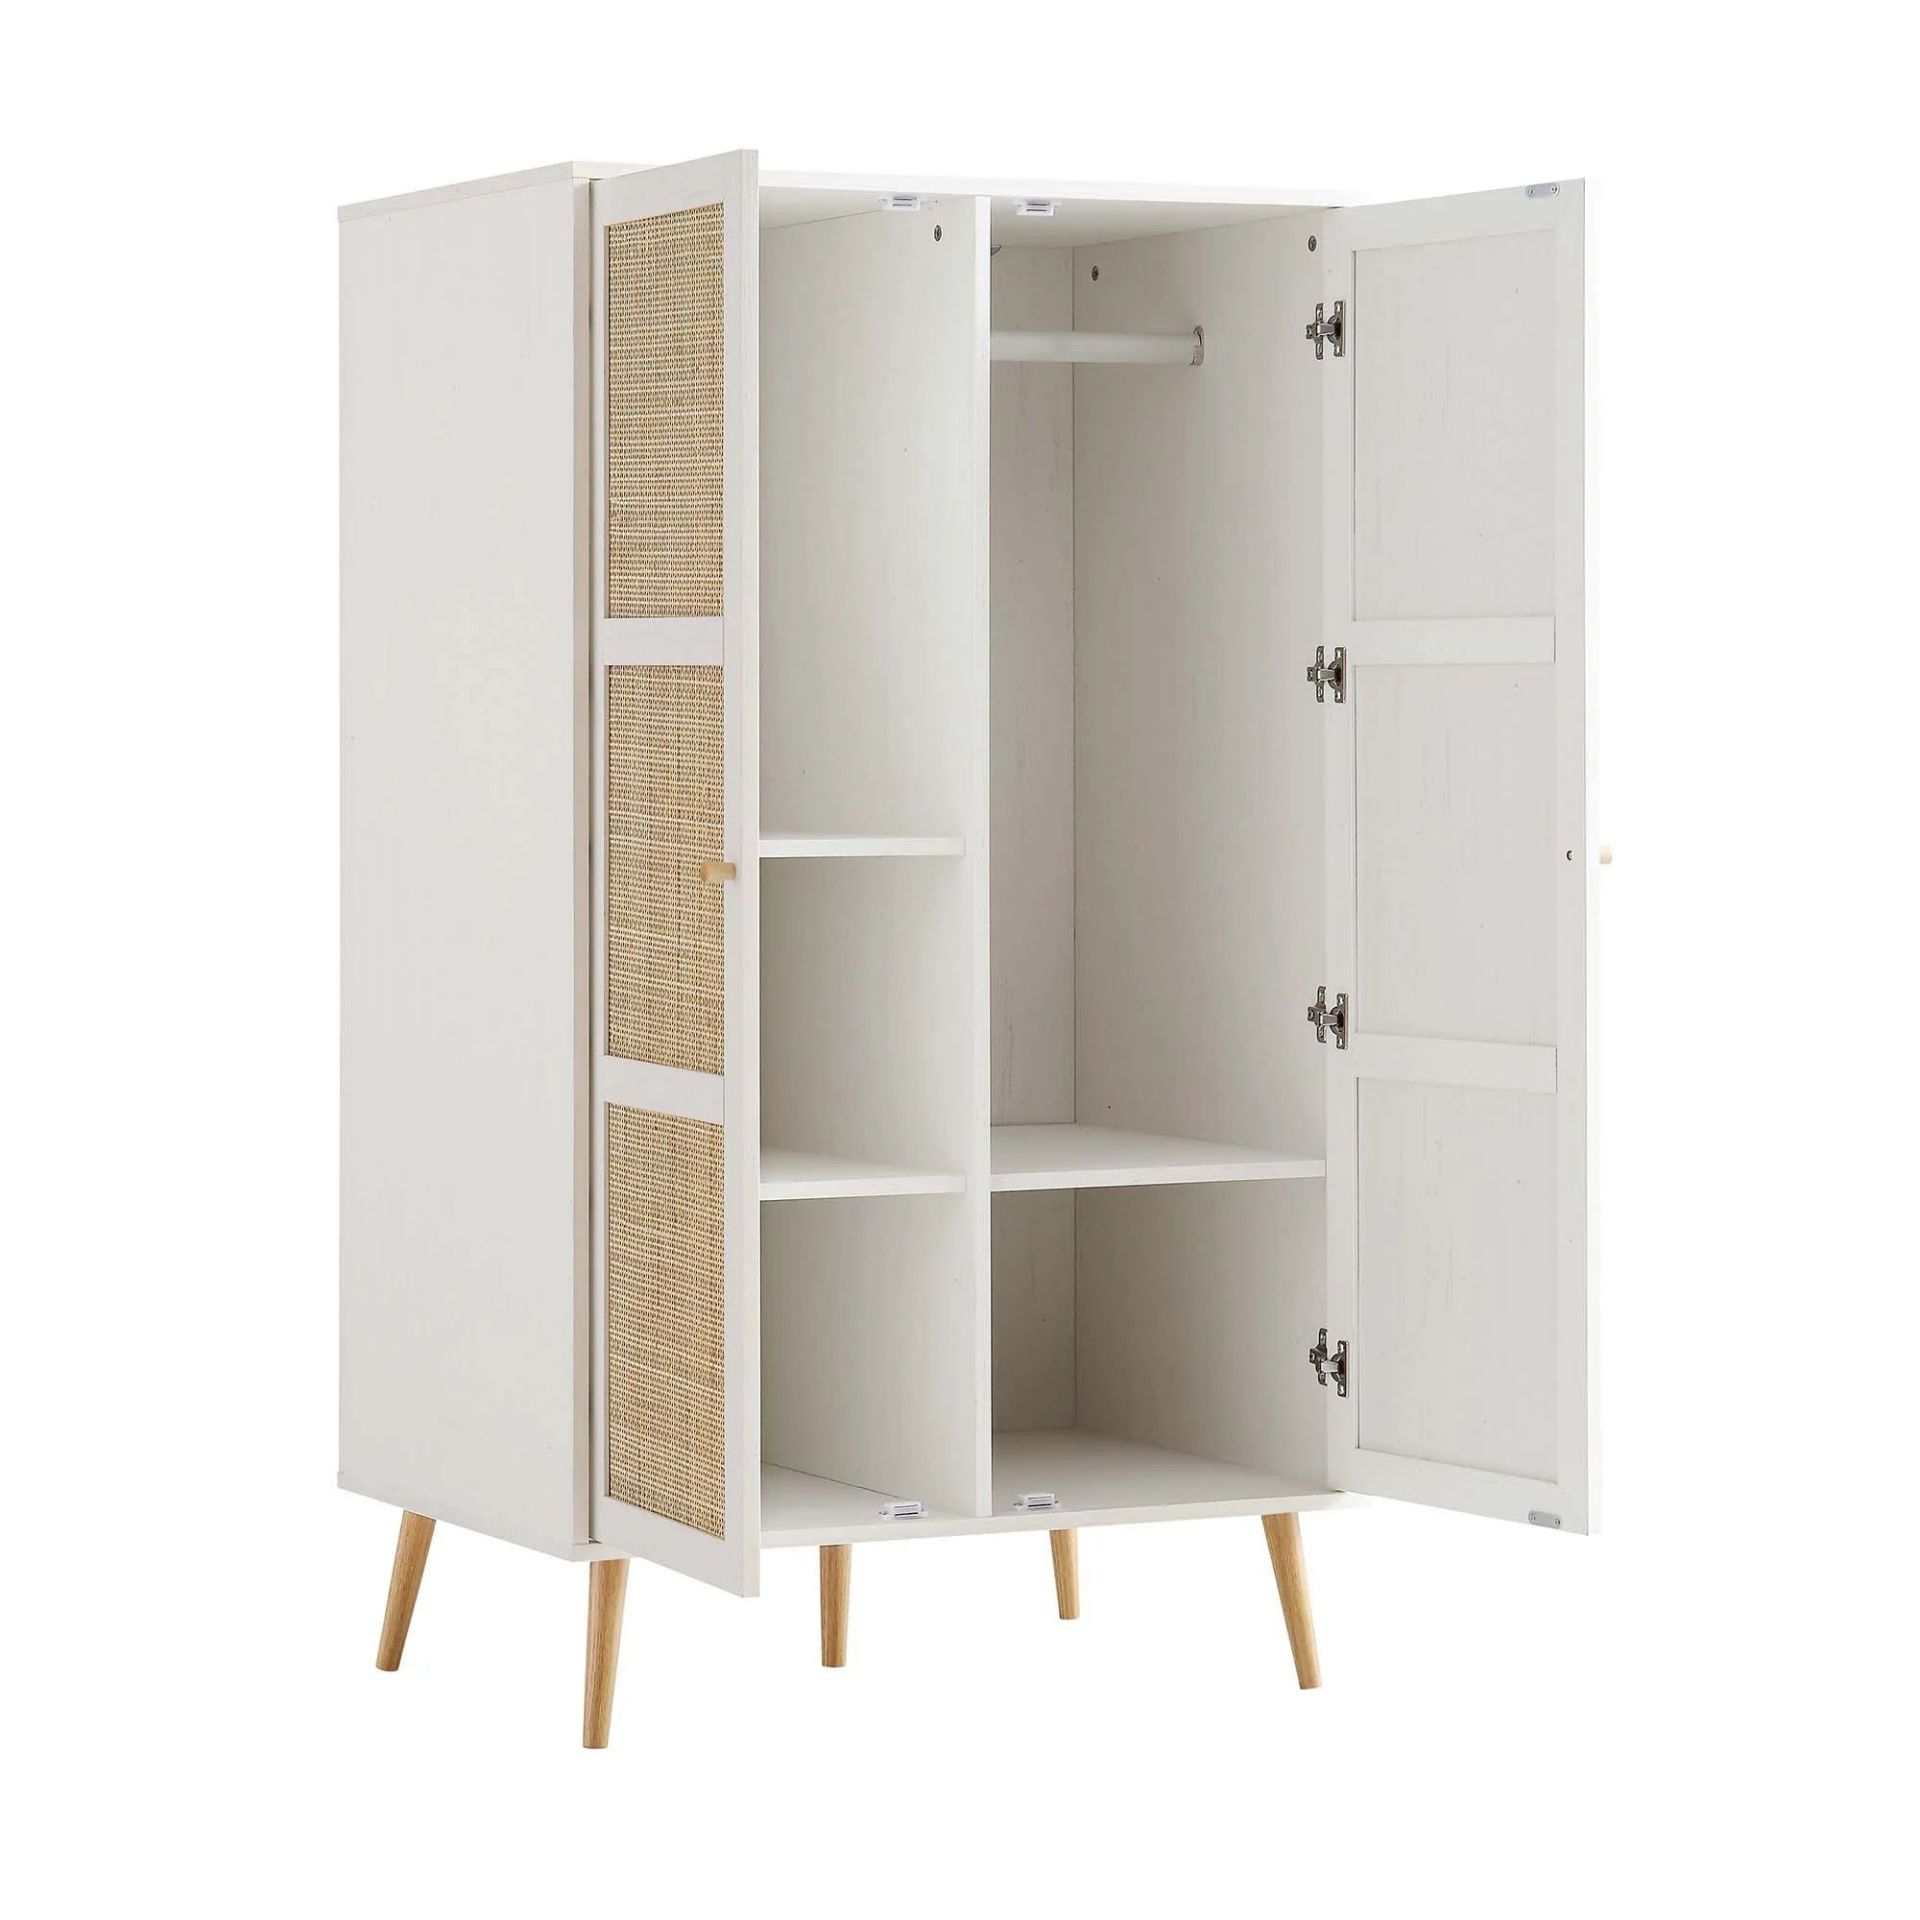 Frances Woven Rattan Compact Double Wardrobe, White. - R14. RRP £399.99. Crafted from wood and - Image 2 of 2